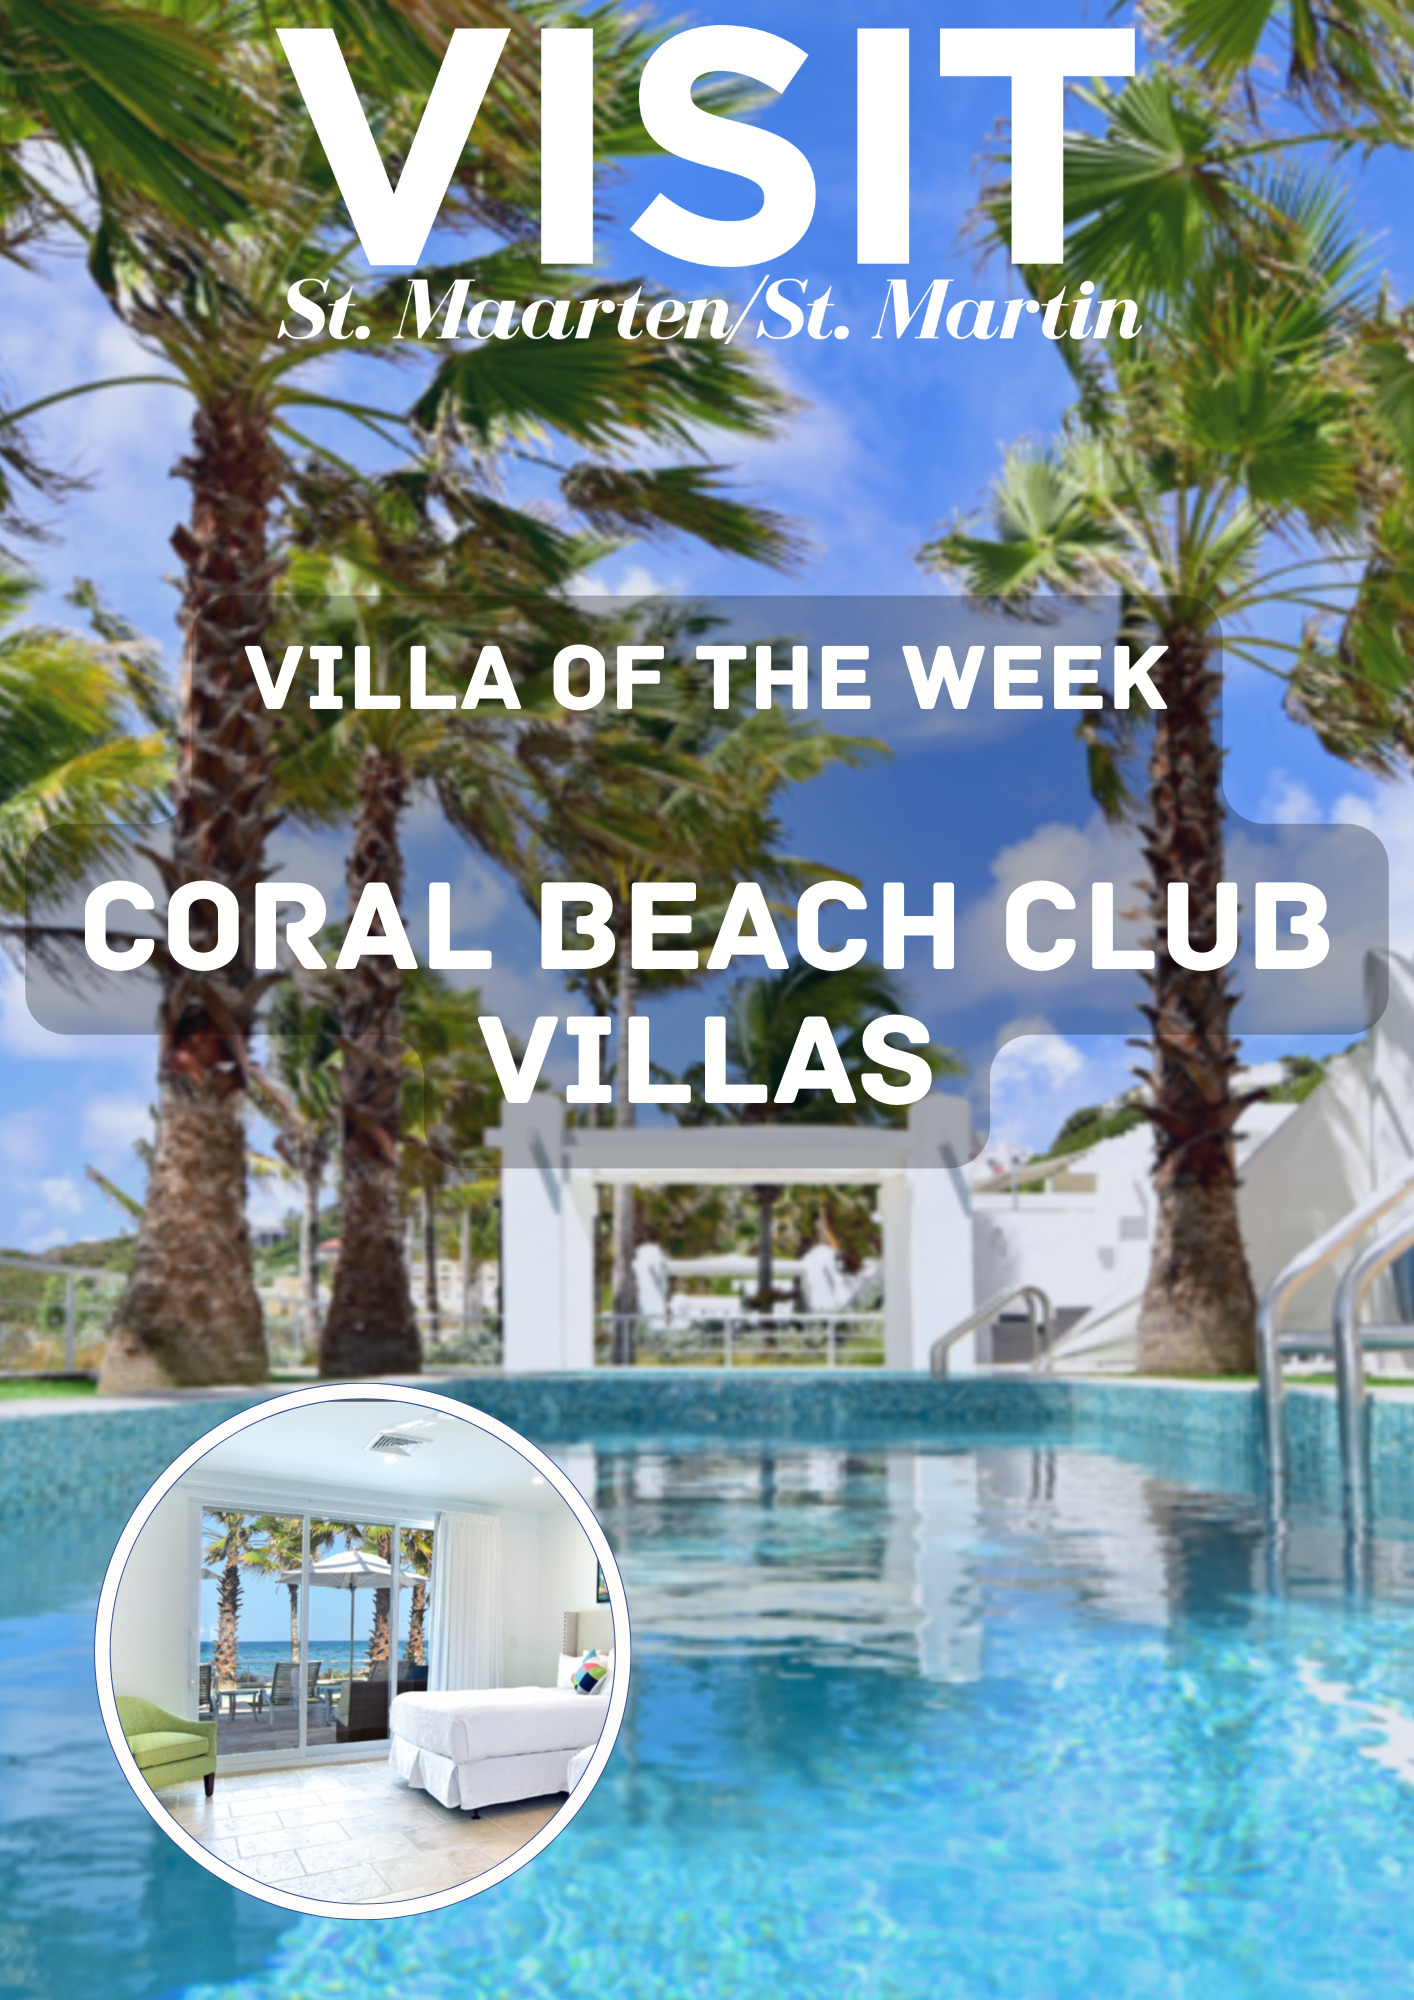 Villa of the week is Coral Beach Club Villas located in the Oyster Pond area of St Maarten on the Dutch side of the Caribbean island